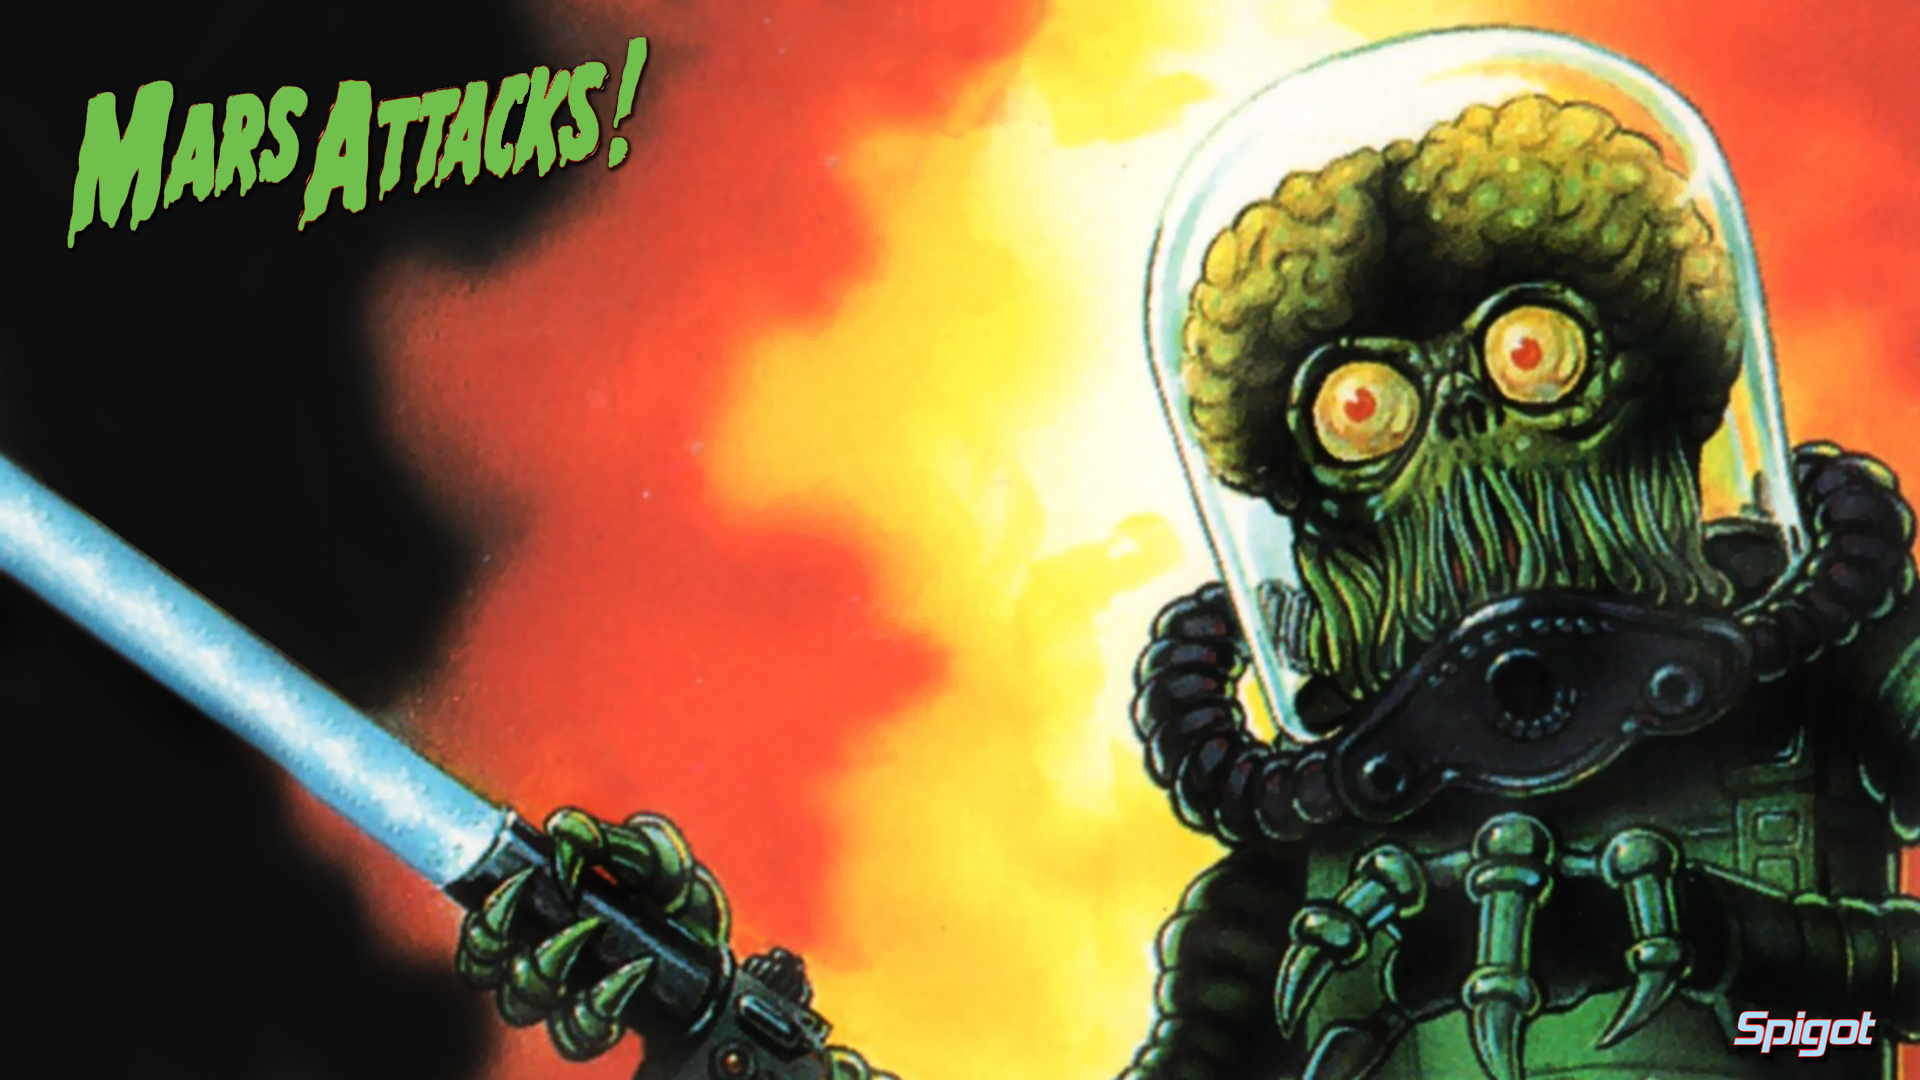 Here Are Some More Mars Attacks Wallpaper I Did Time Back But